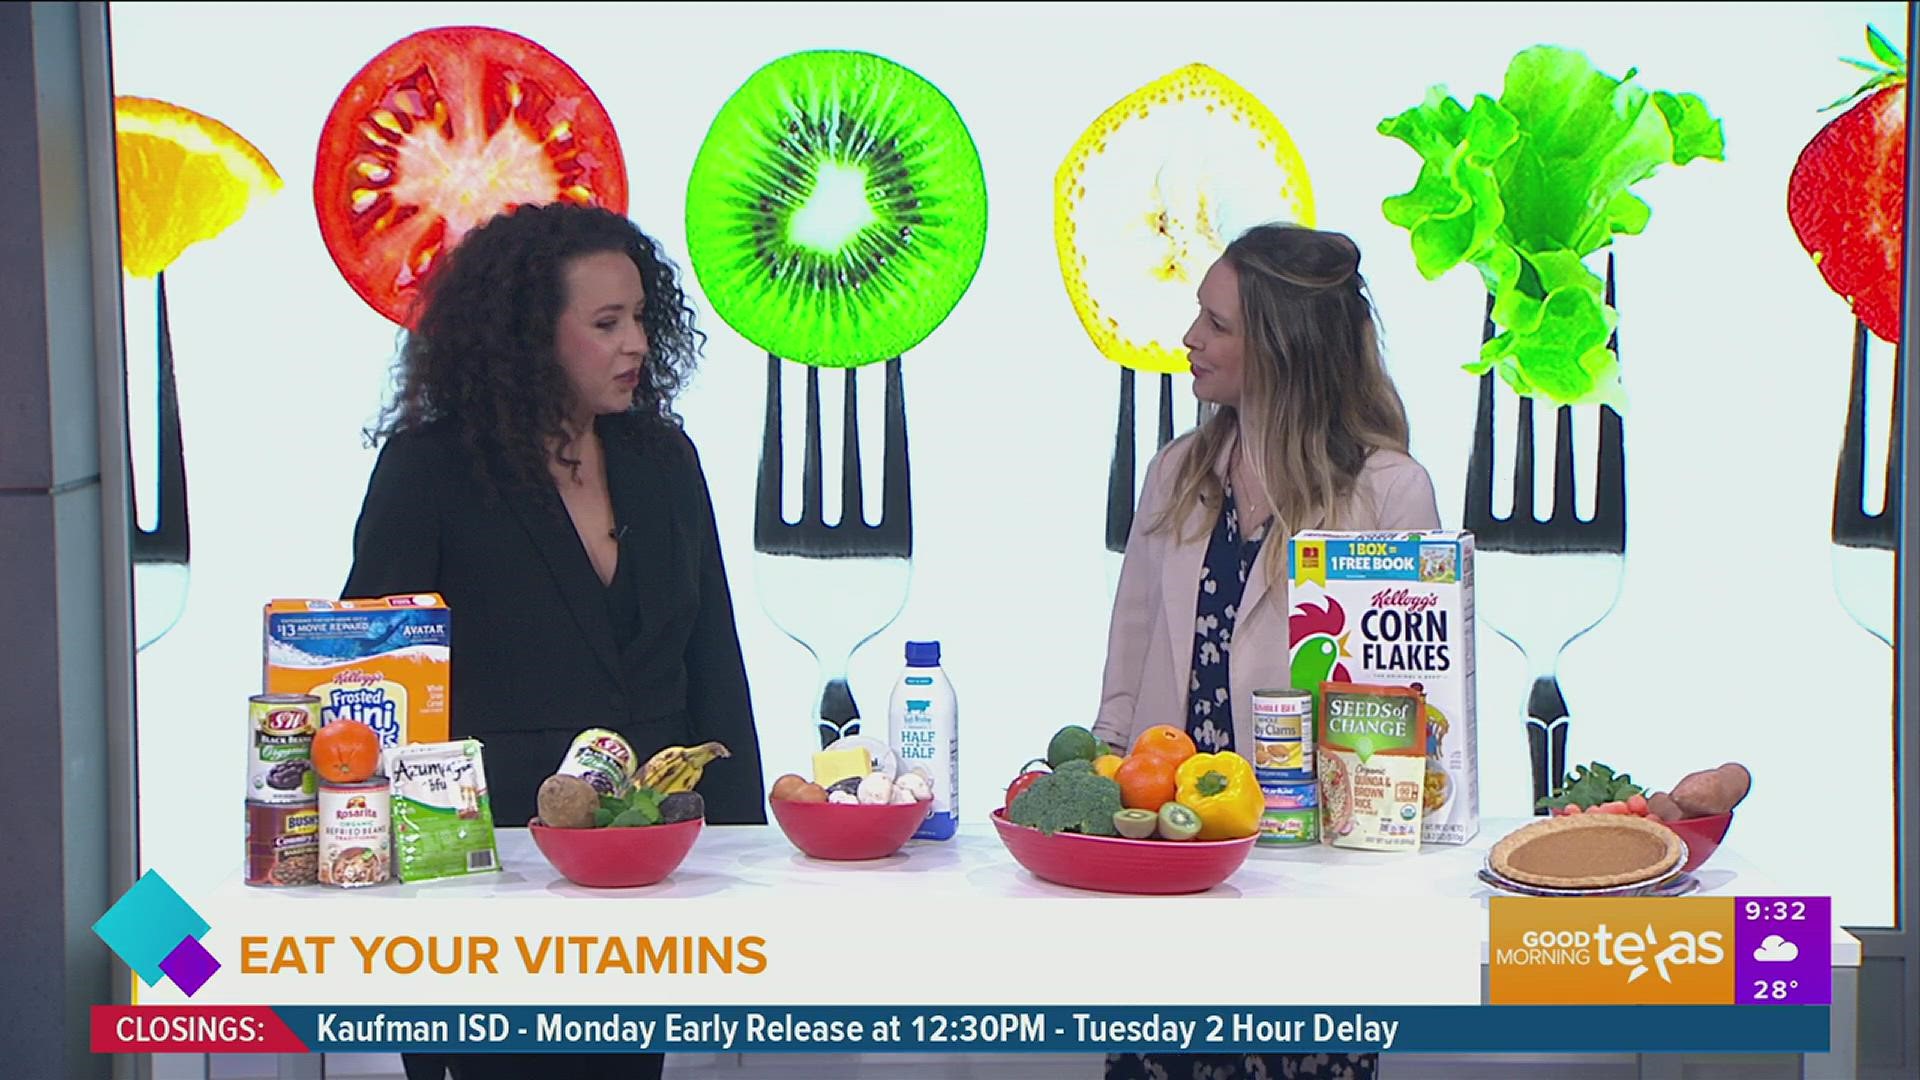 Maggy Doherty with Doherty Nutrition shares what you can eat for a vitamin boost. Go to dohertynutrition.com for more information.